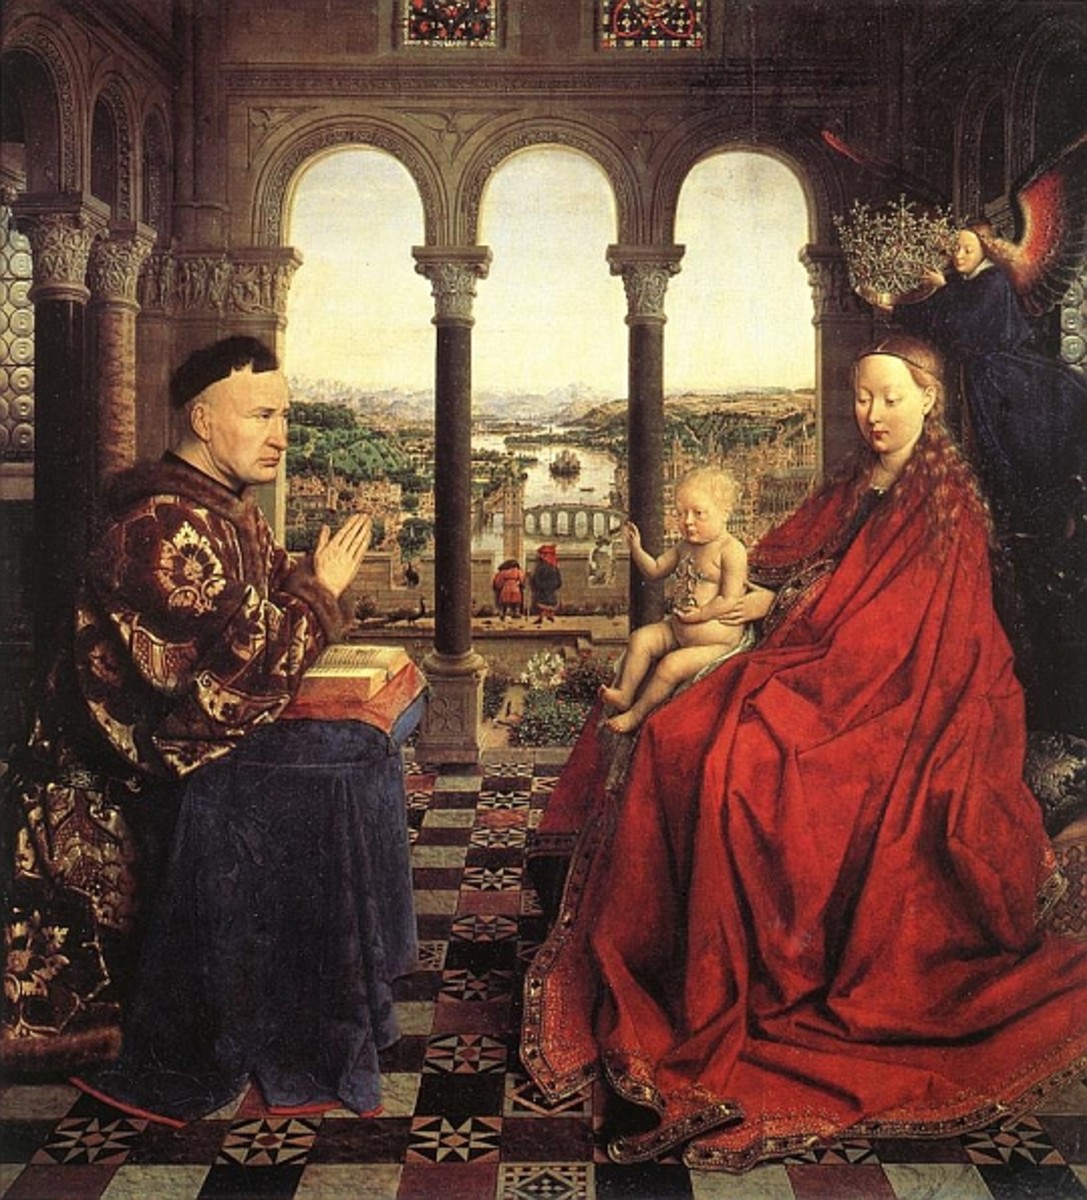 Art, Painters, and the History of Renaissance Paintings | hubpages